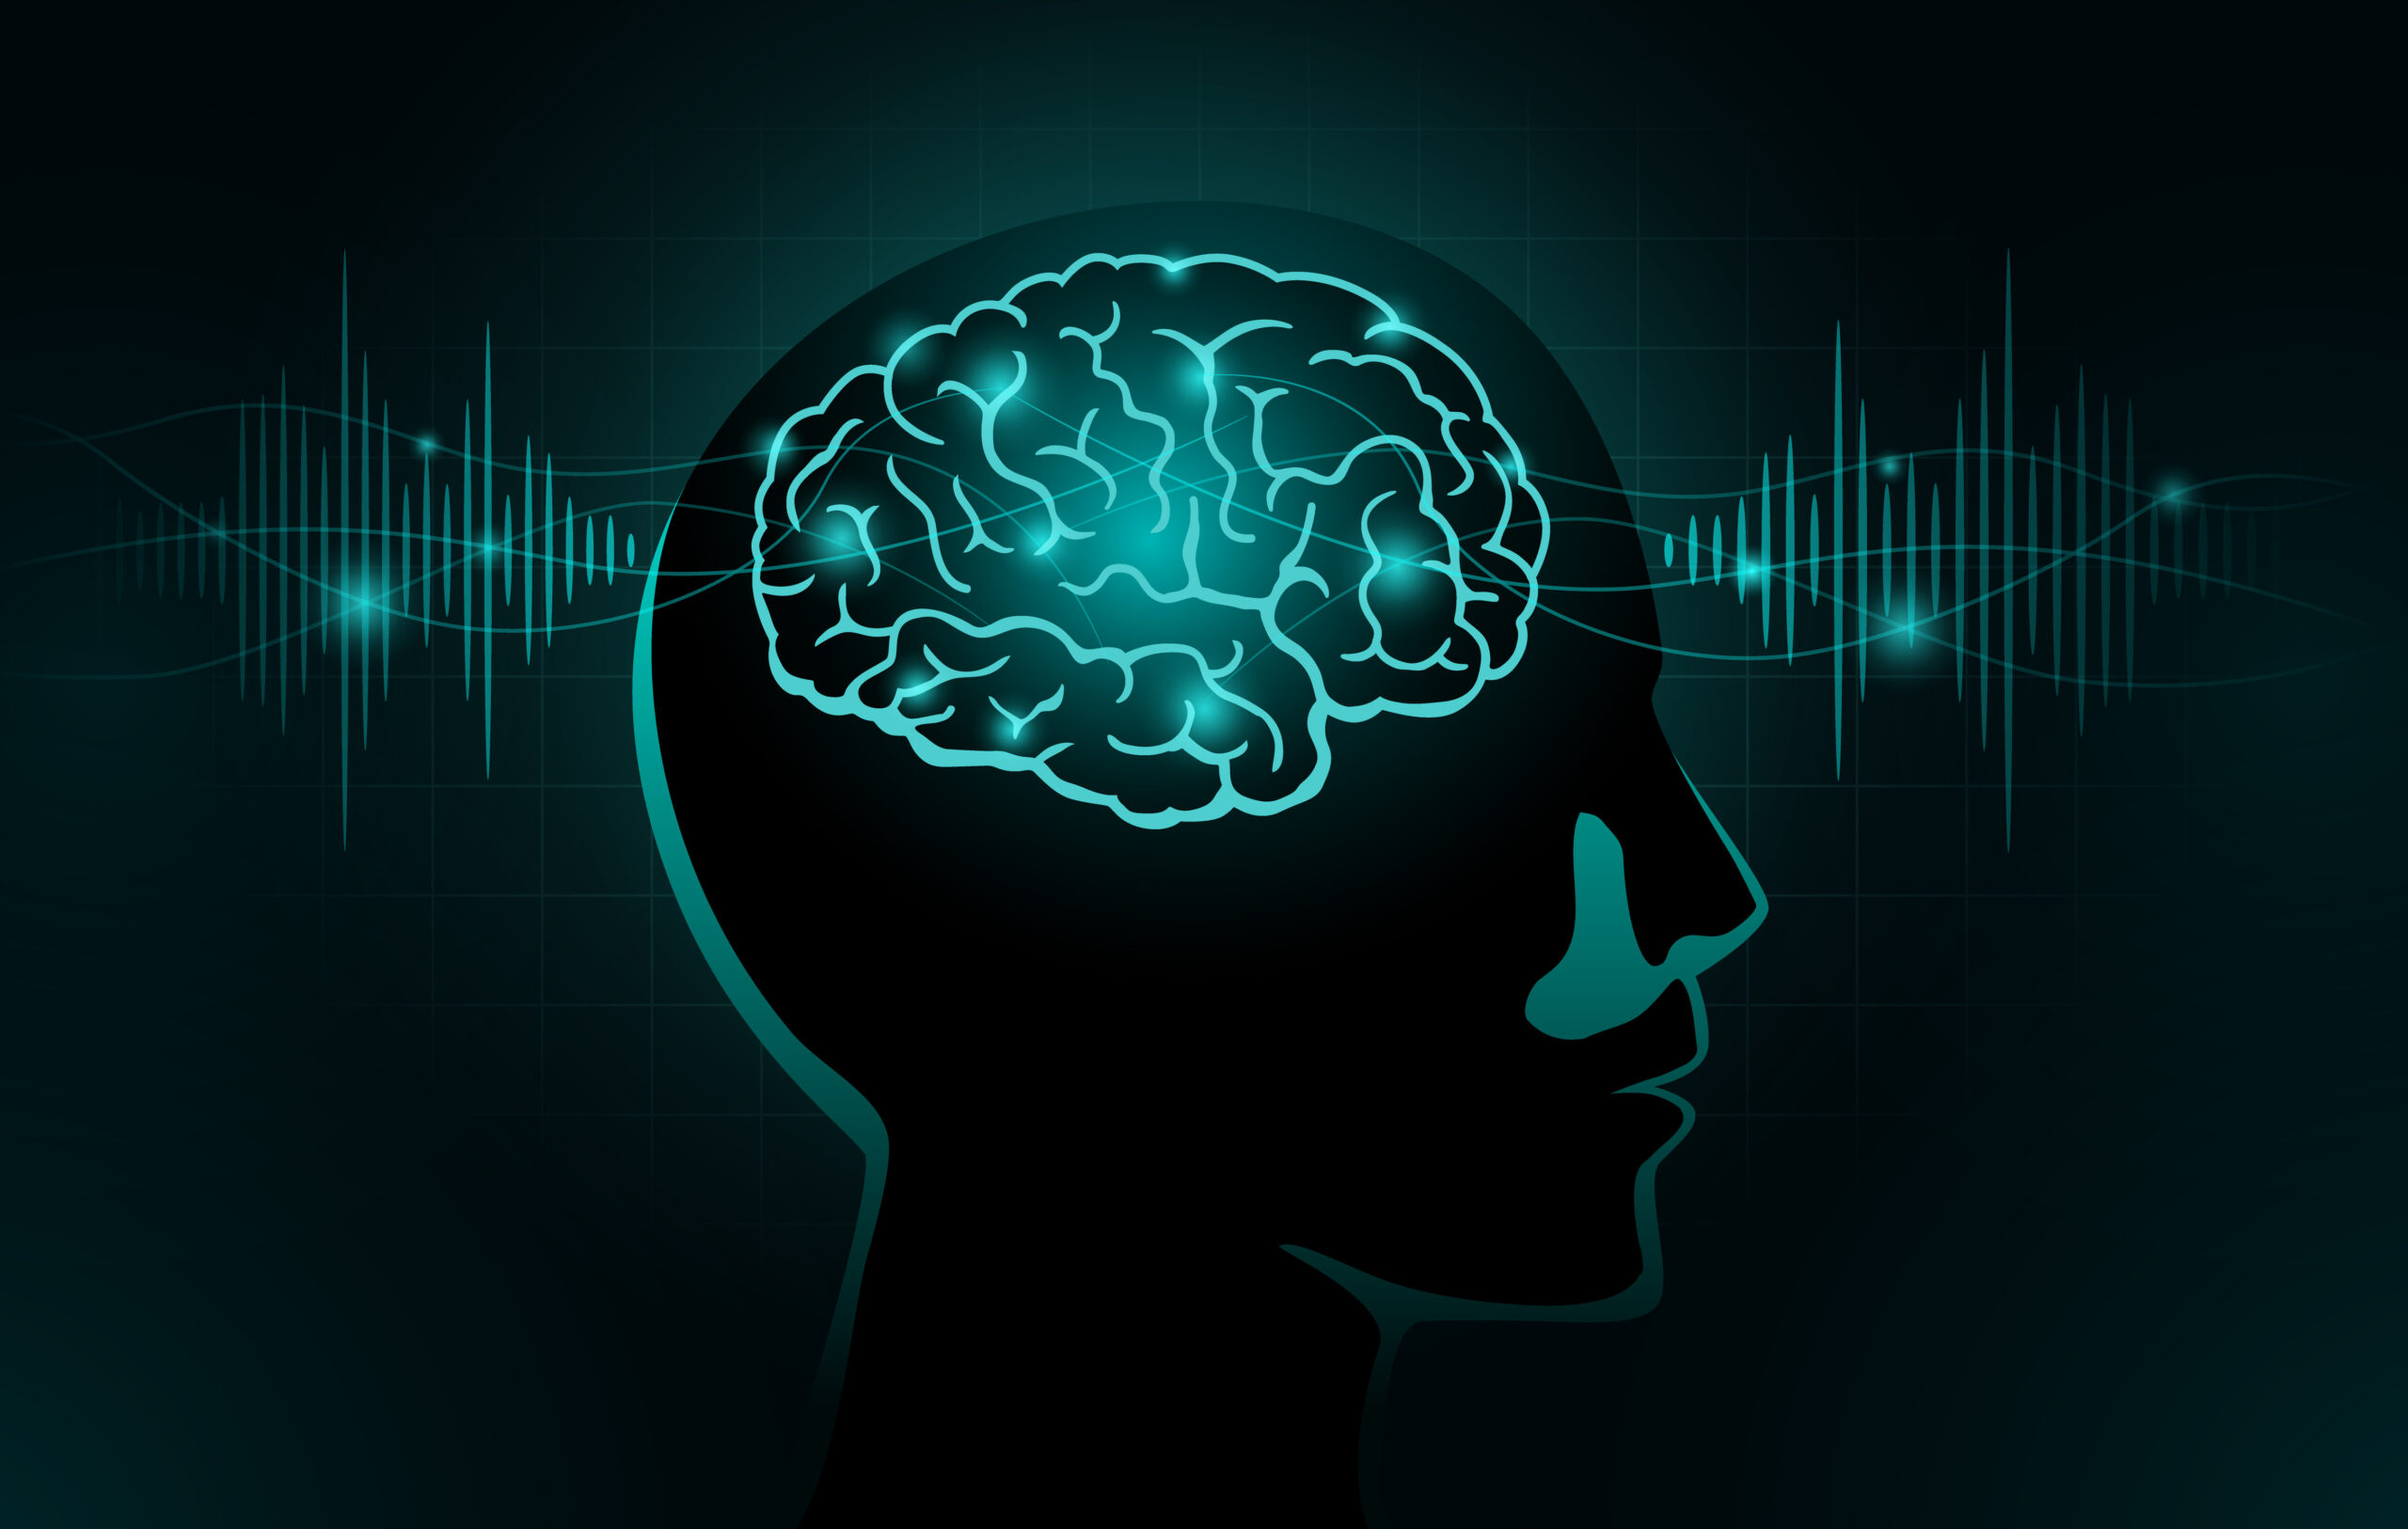 Deep Brain Stimulation: What is it and How is it Changing Medicine?